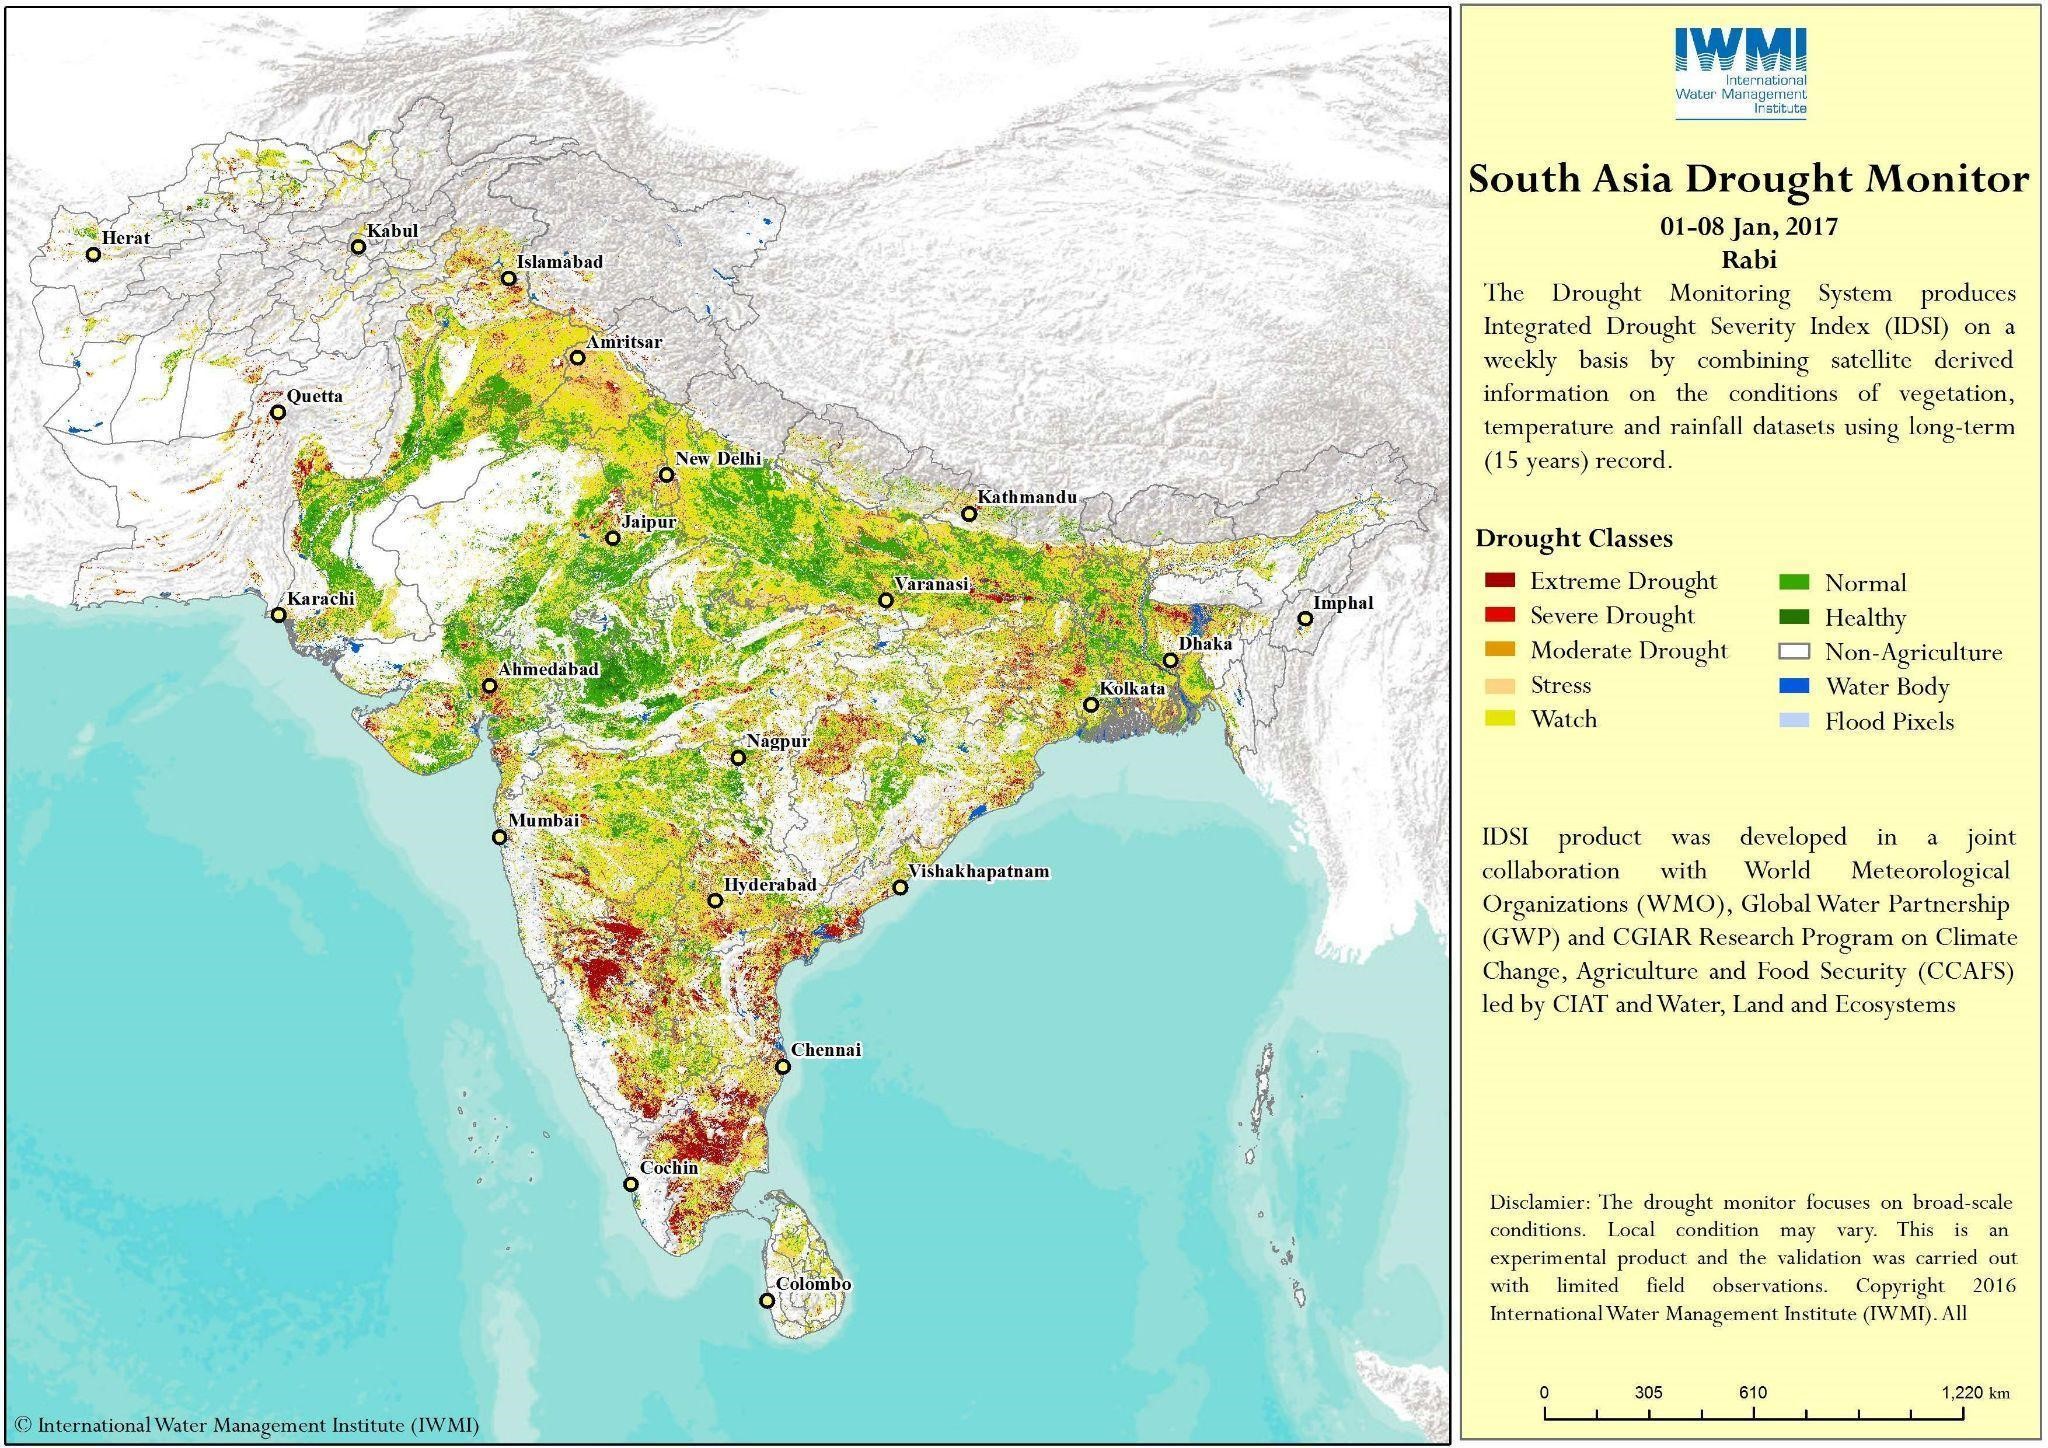 The South Asia Drought Monitoring System (2017)